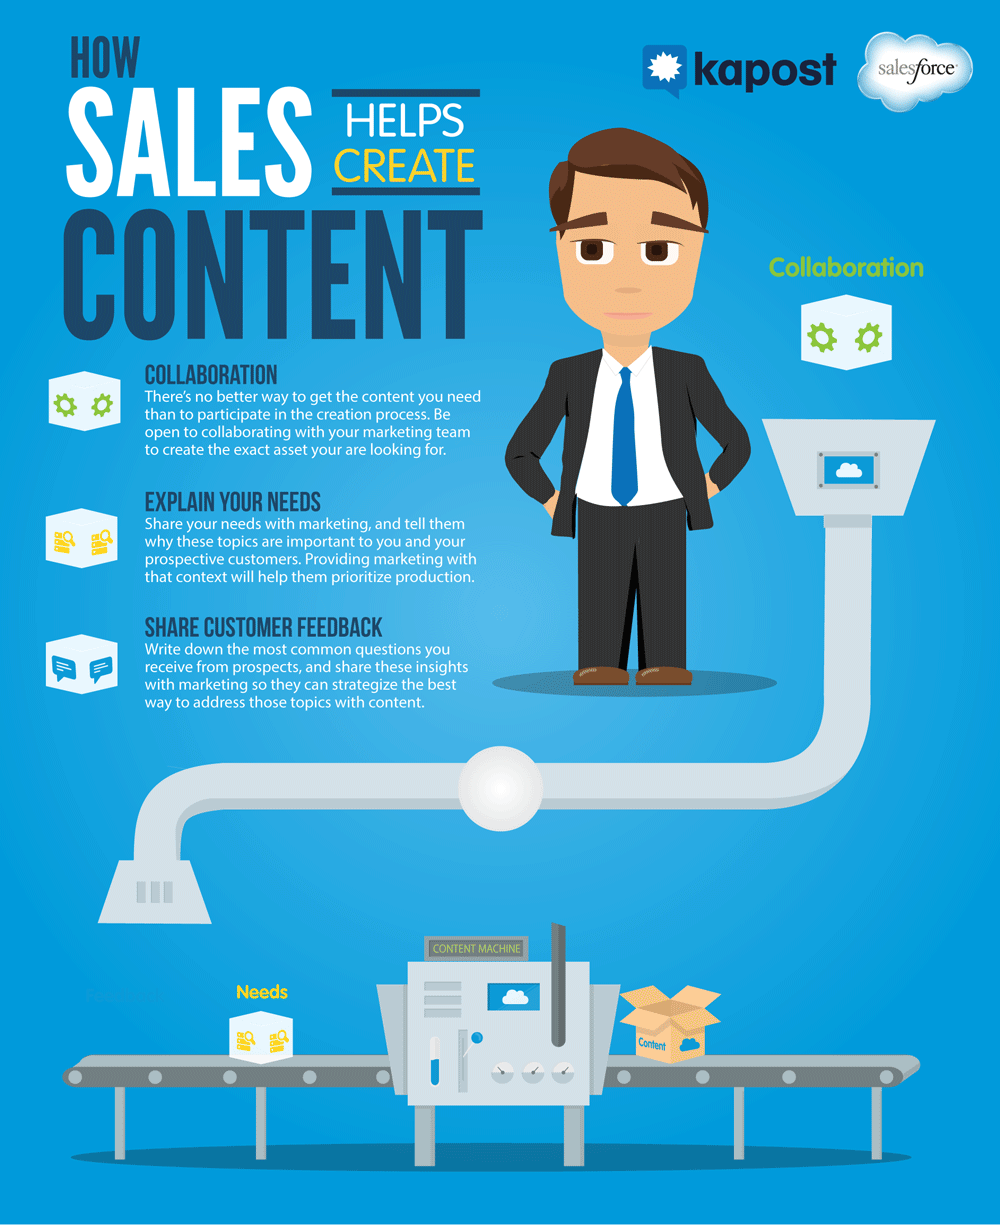 How Sales helps create content